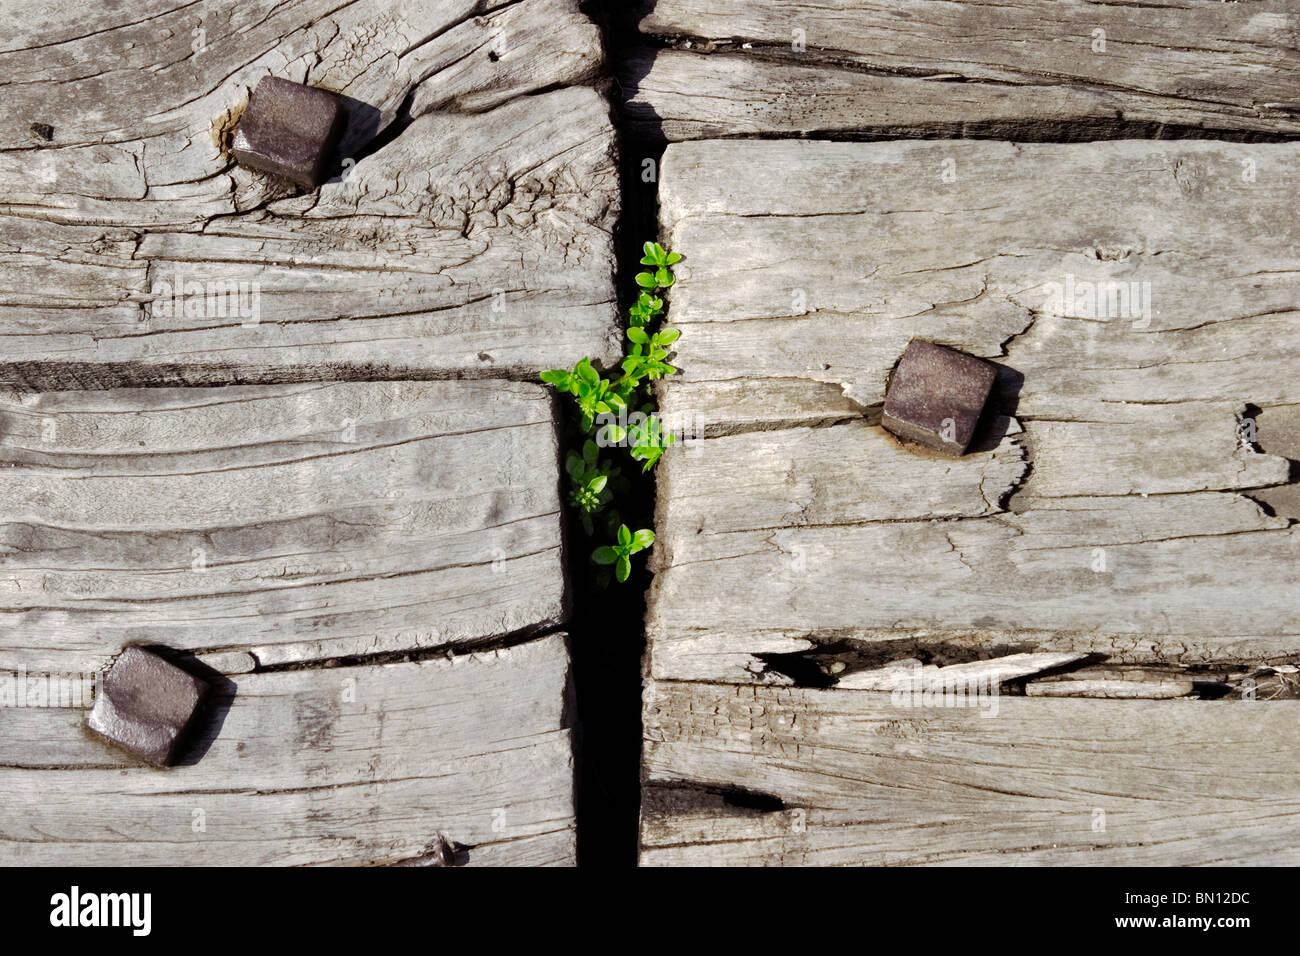 Green shoots growing through gap in old wooden planks Stock Photo